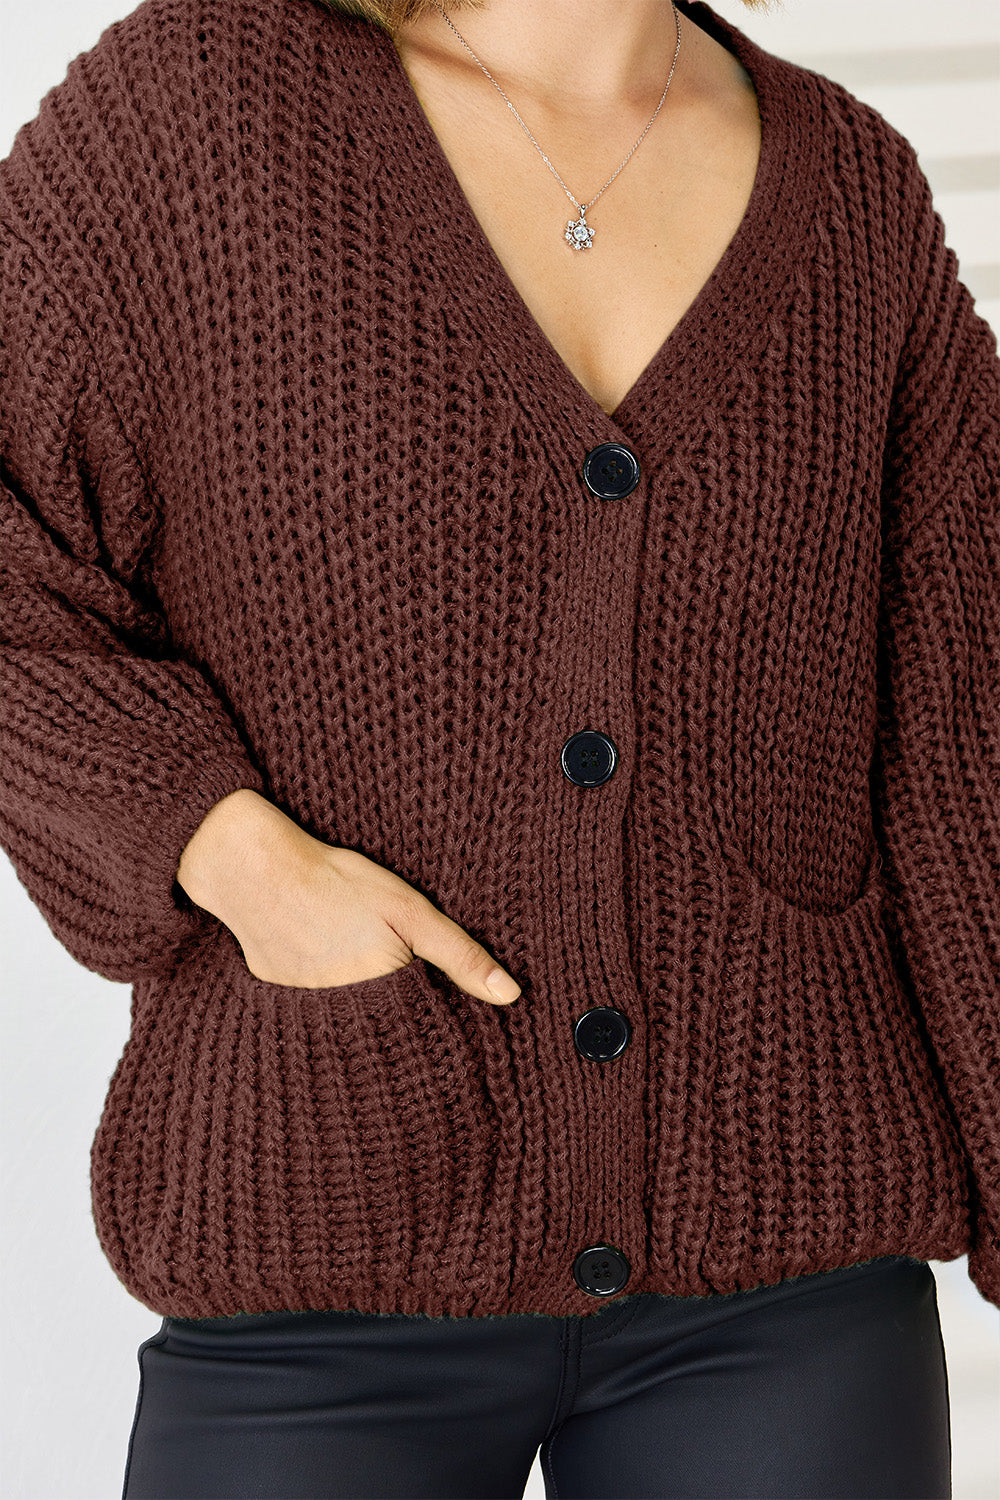 Cardigan with pockets and buttons Women's Fashion Knit Baggy Sleeves Open Sweater